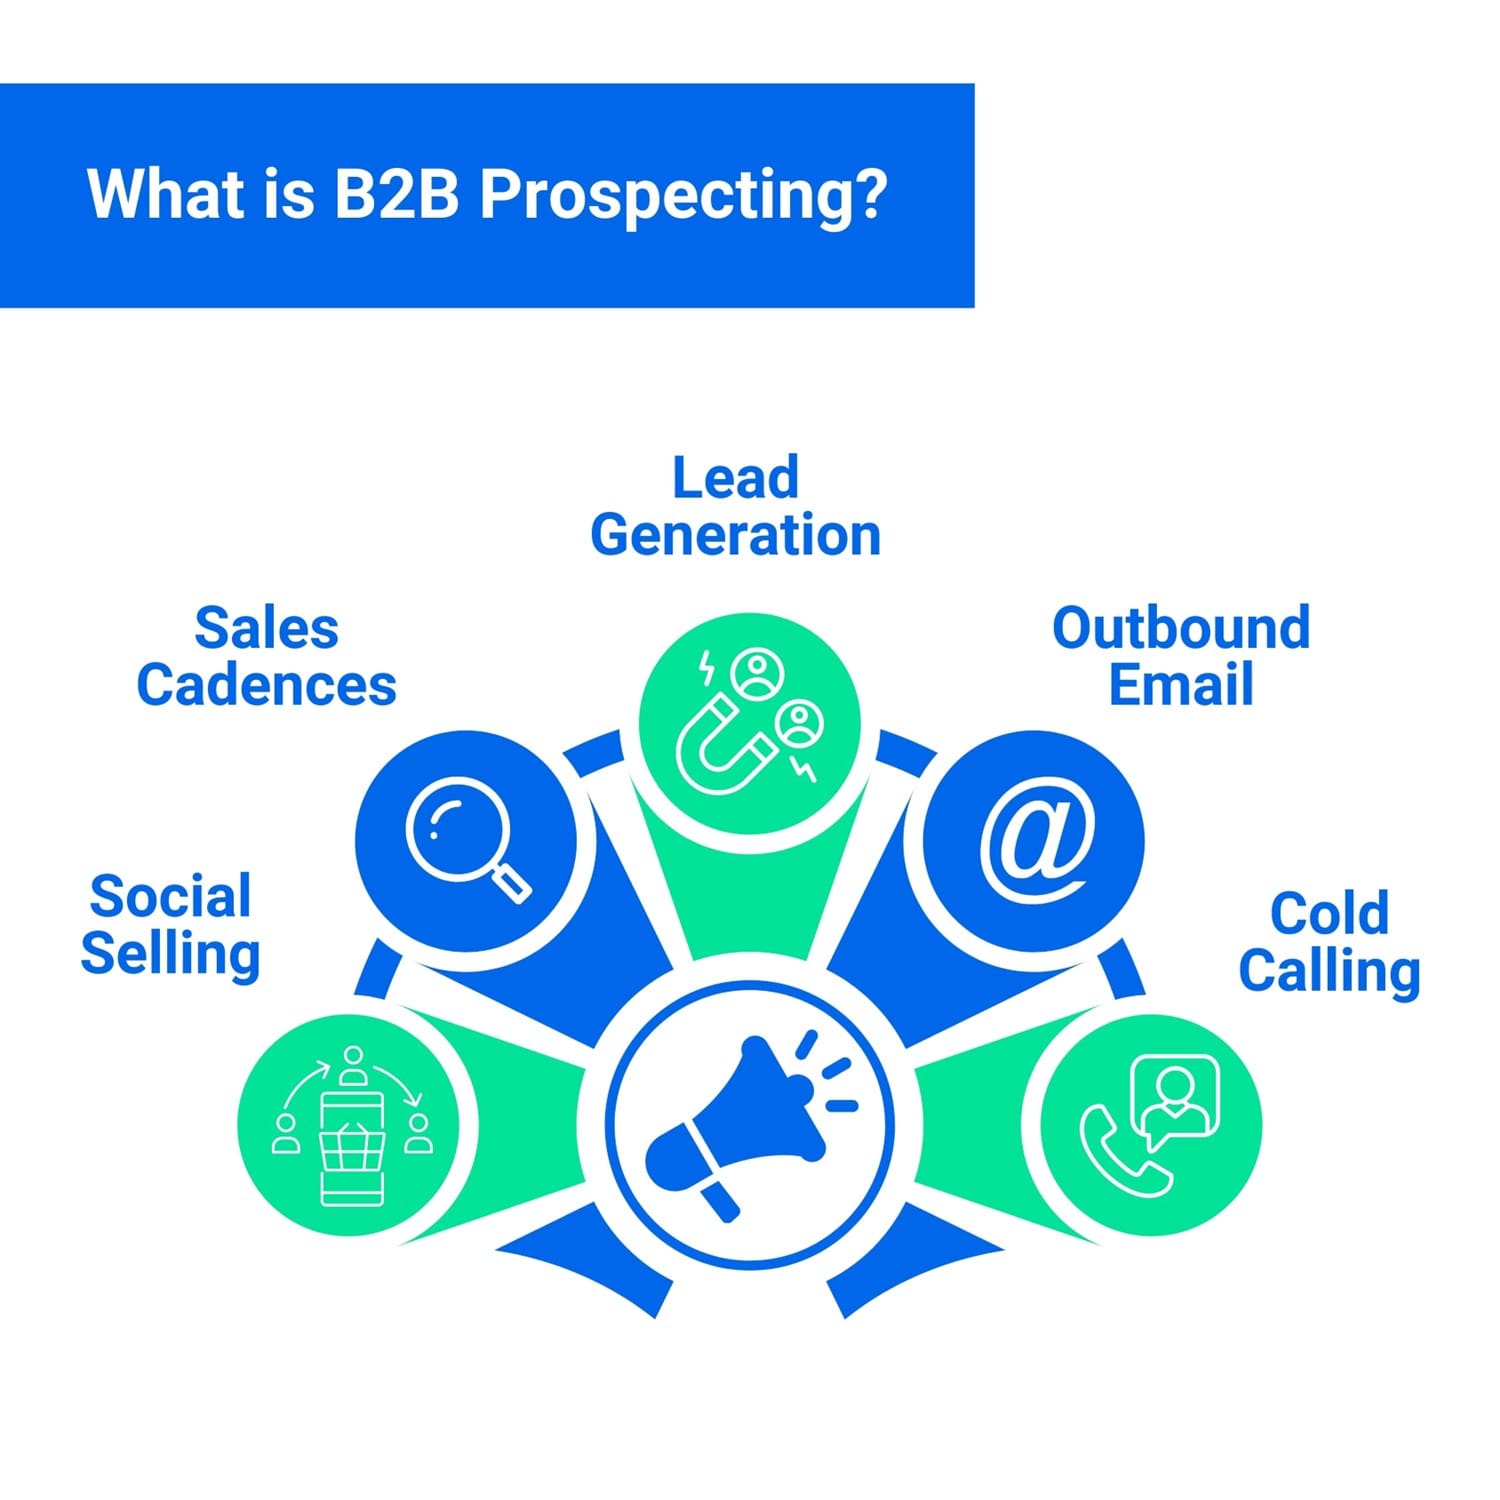 What is B2B Prospecting?